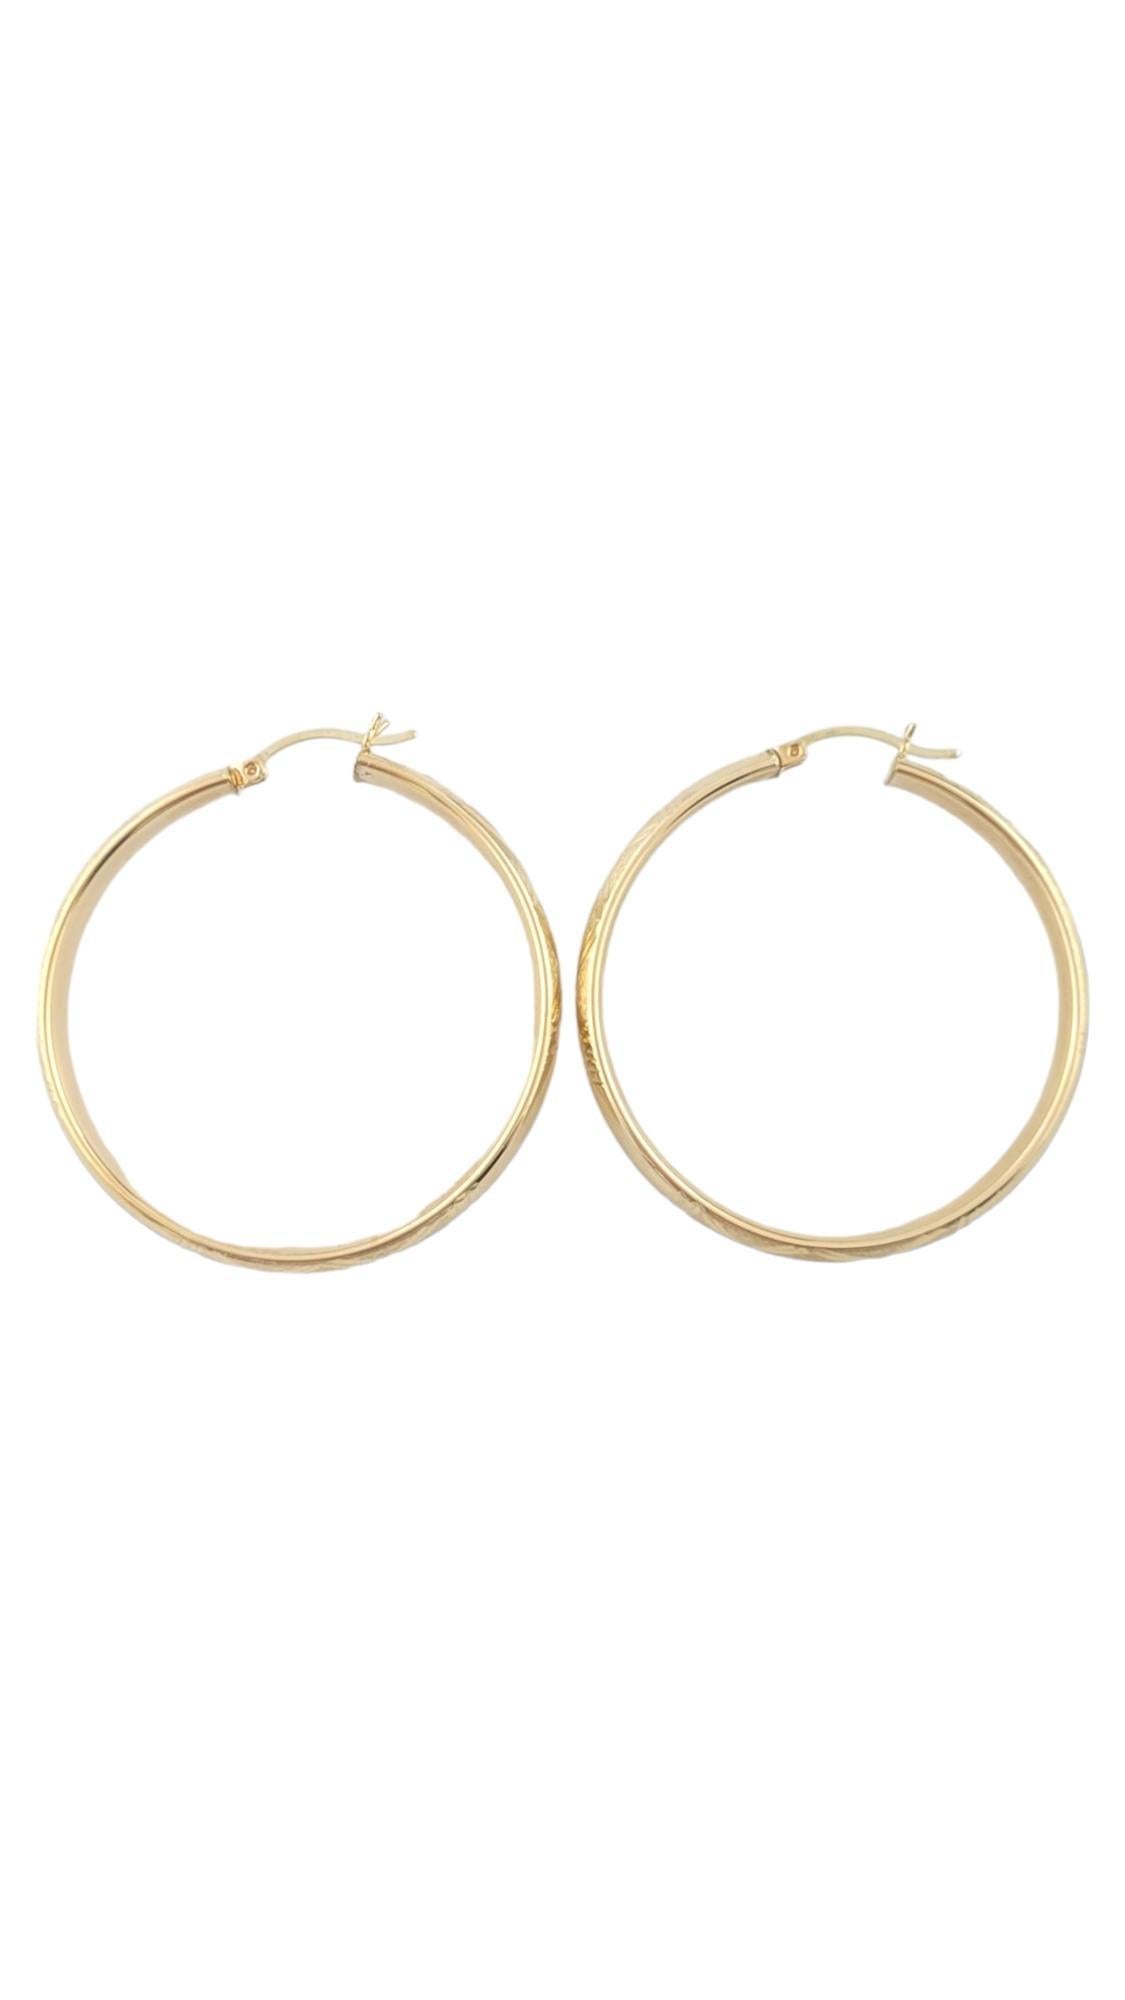 Vintage 14K Yellow Gold Patterned Hoop Earrings

This beautiful set of 14K yellow gold hoop earrings have a beautiful pattern around the outside!

Diameter: 44.74mm
Width: 6.0mm

Weight: 4.0 dwt/ 6.3 g

Hallmark: 14K

Very good condition,